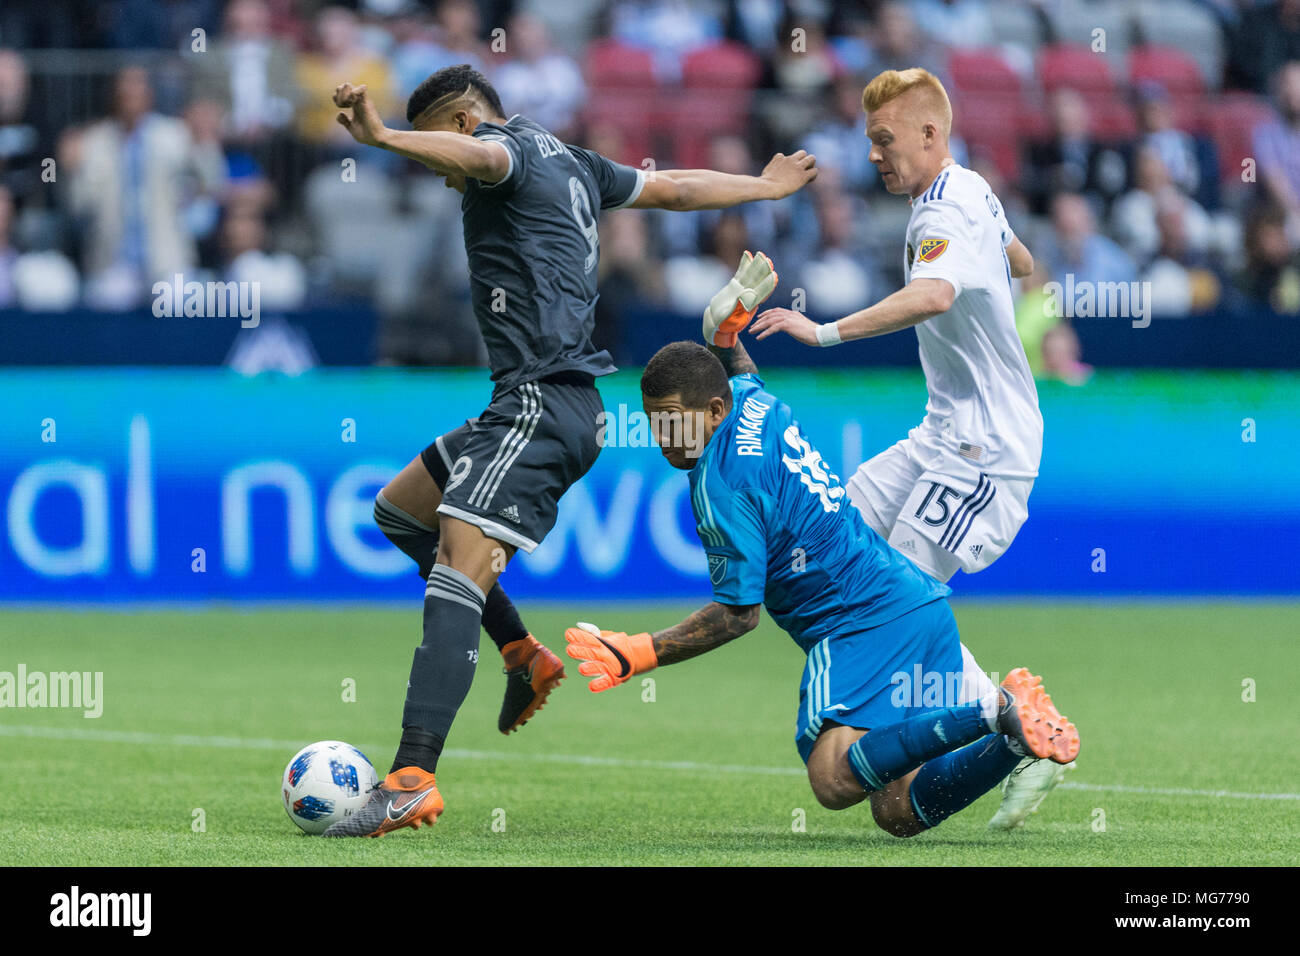 Vancouver, Canada. 27 April 2018. Anthony Blondell (9) of Vancouver Whitecaps getting past Goalkeeper Nick Rimando (18) of Real Salt Lake.  Vancouver Whitecaps vs Real Salt Lake BC Place. Vancouver wins 2-0 © Gerry Rousseau/Alamy Live News Stock Photo